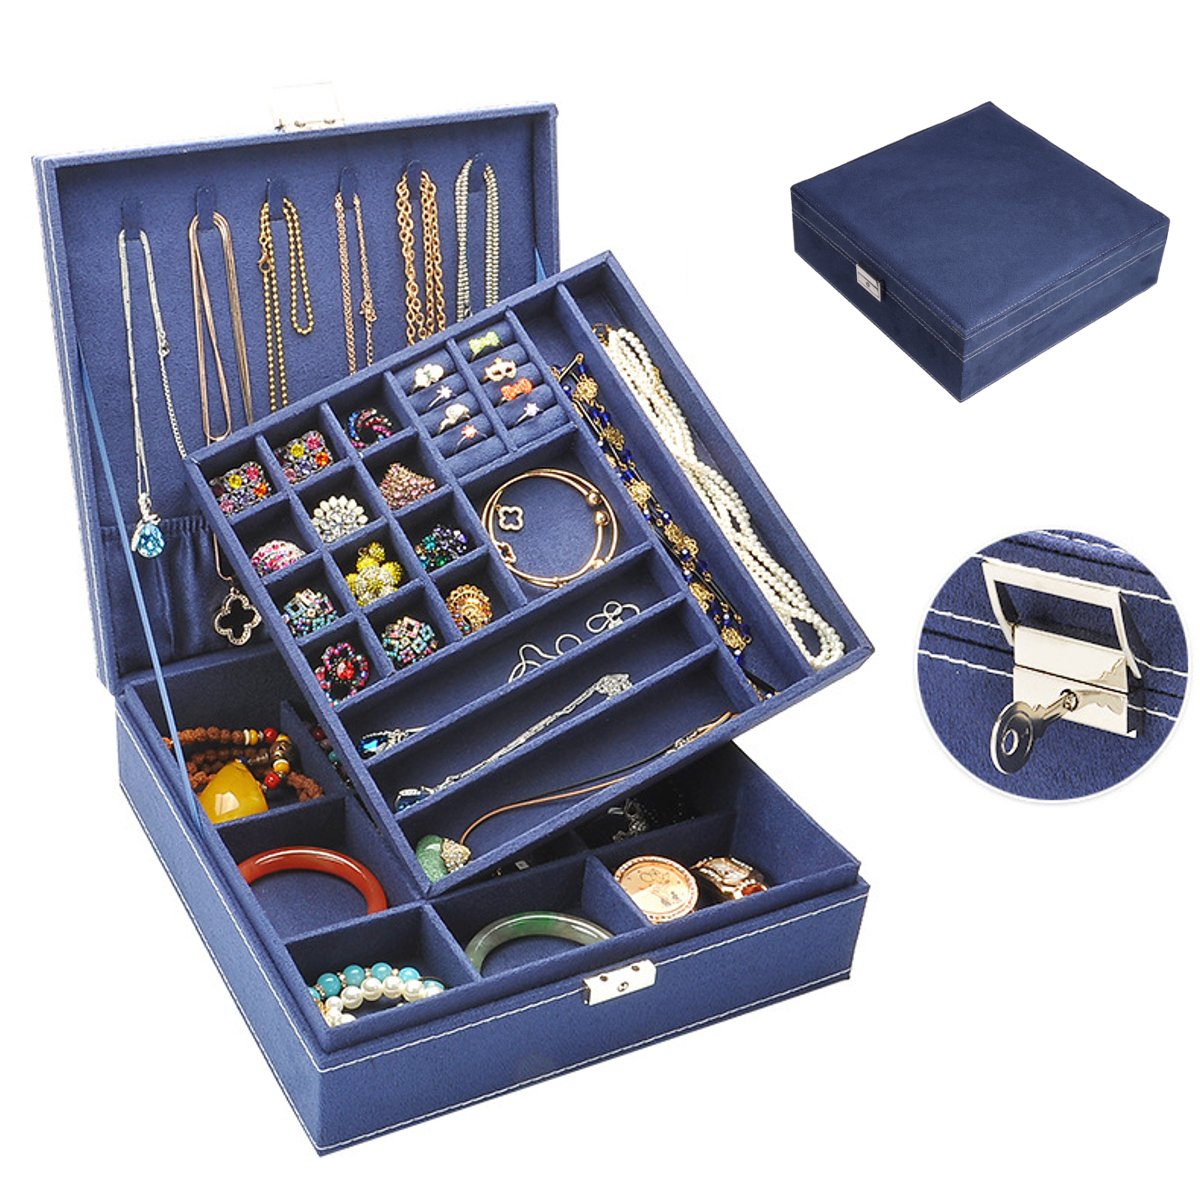 Multi-function-Vintage-Jewelry-Box-Organizers-Two-layer-Lockable-Jewelry-Display-Storage-Case-1855370-22